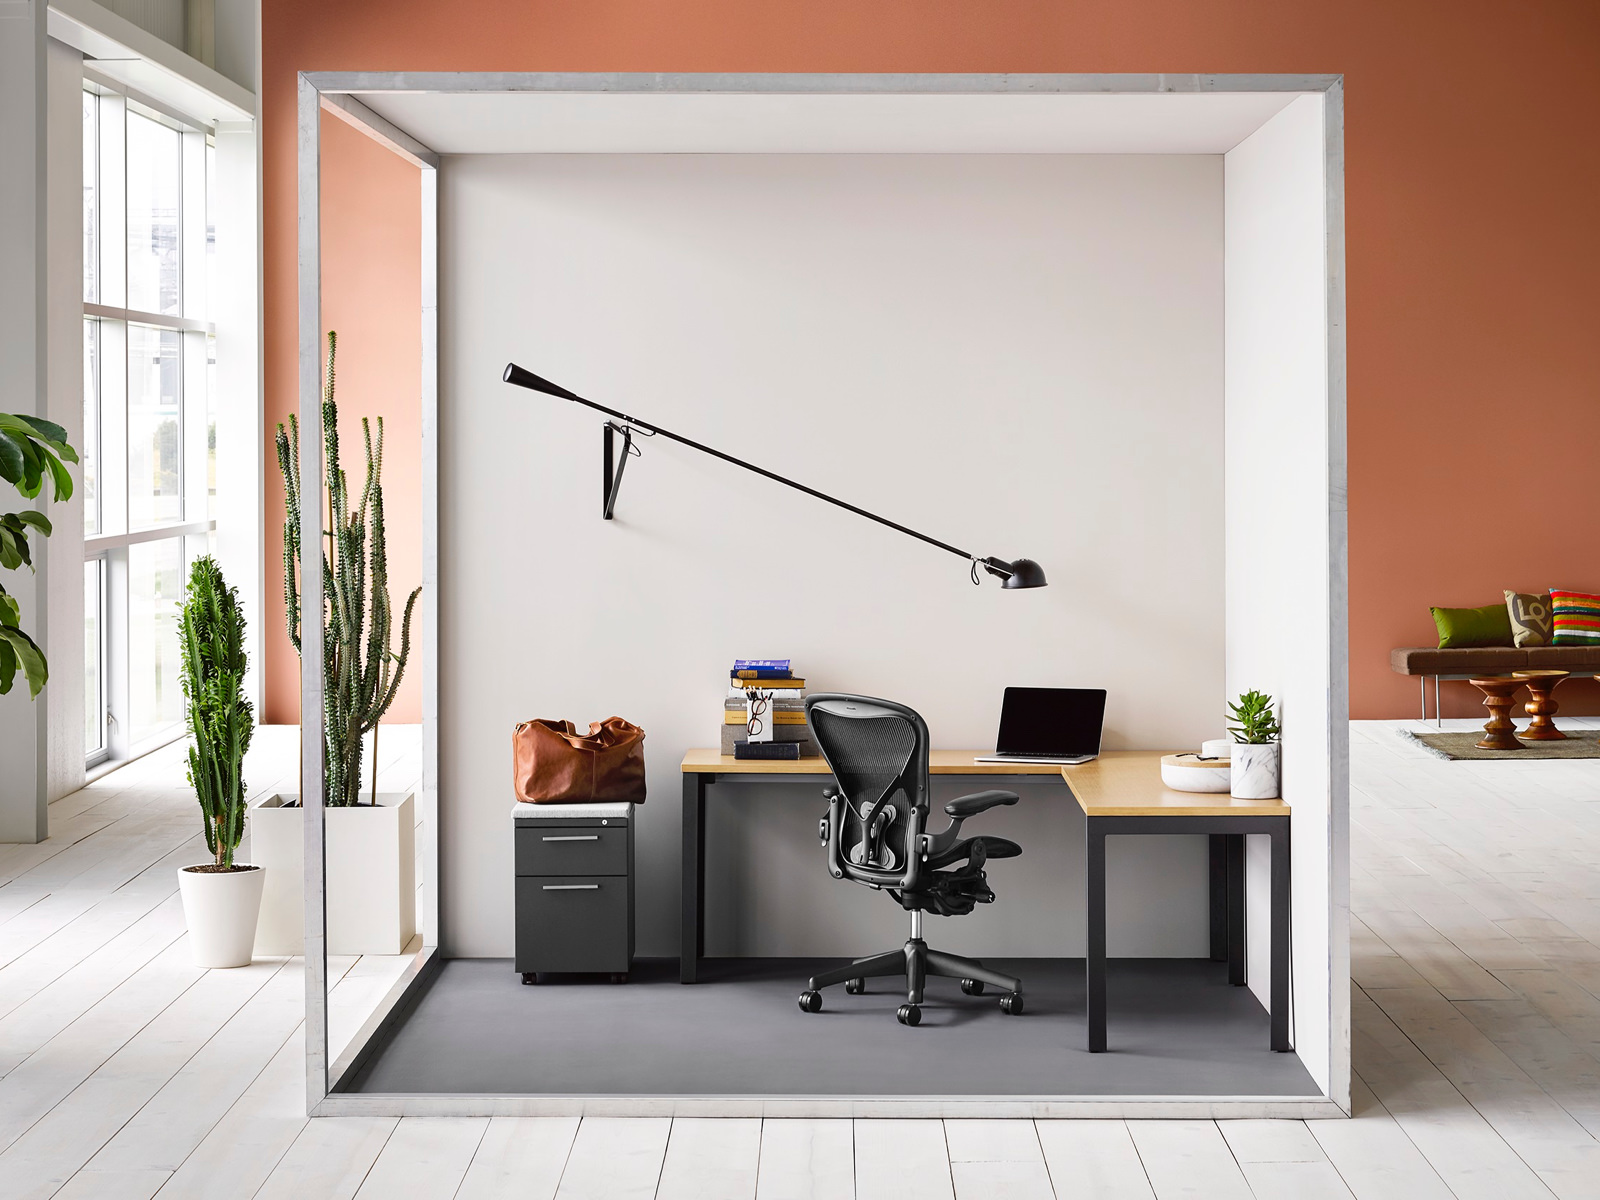 A semi-enclosed touchdown space containing an L-shaped Layout Studio surface, black Aeron office chair, and Tu storage pedestal.